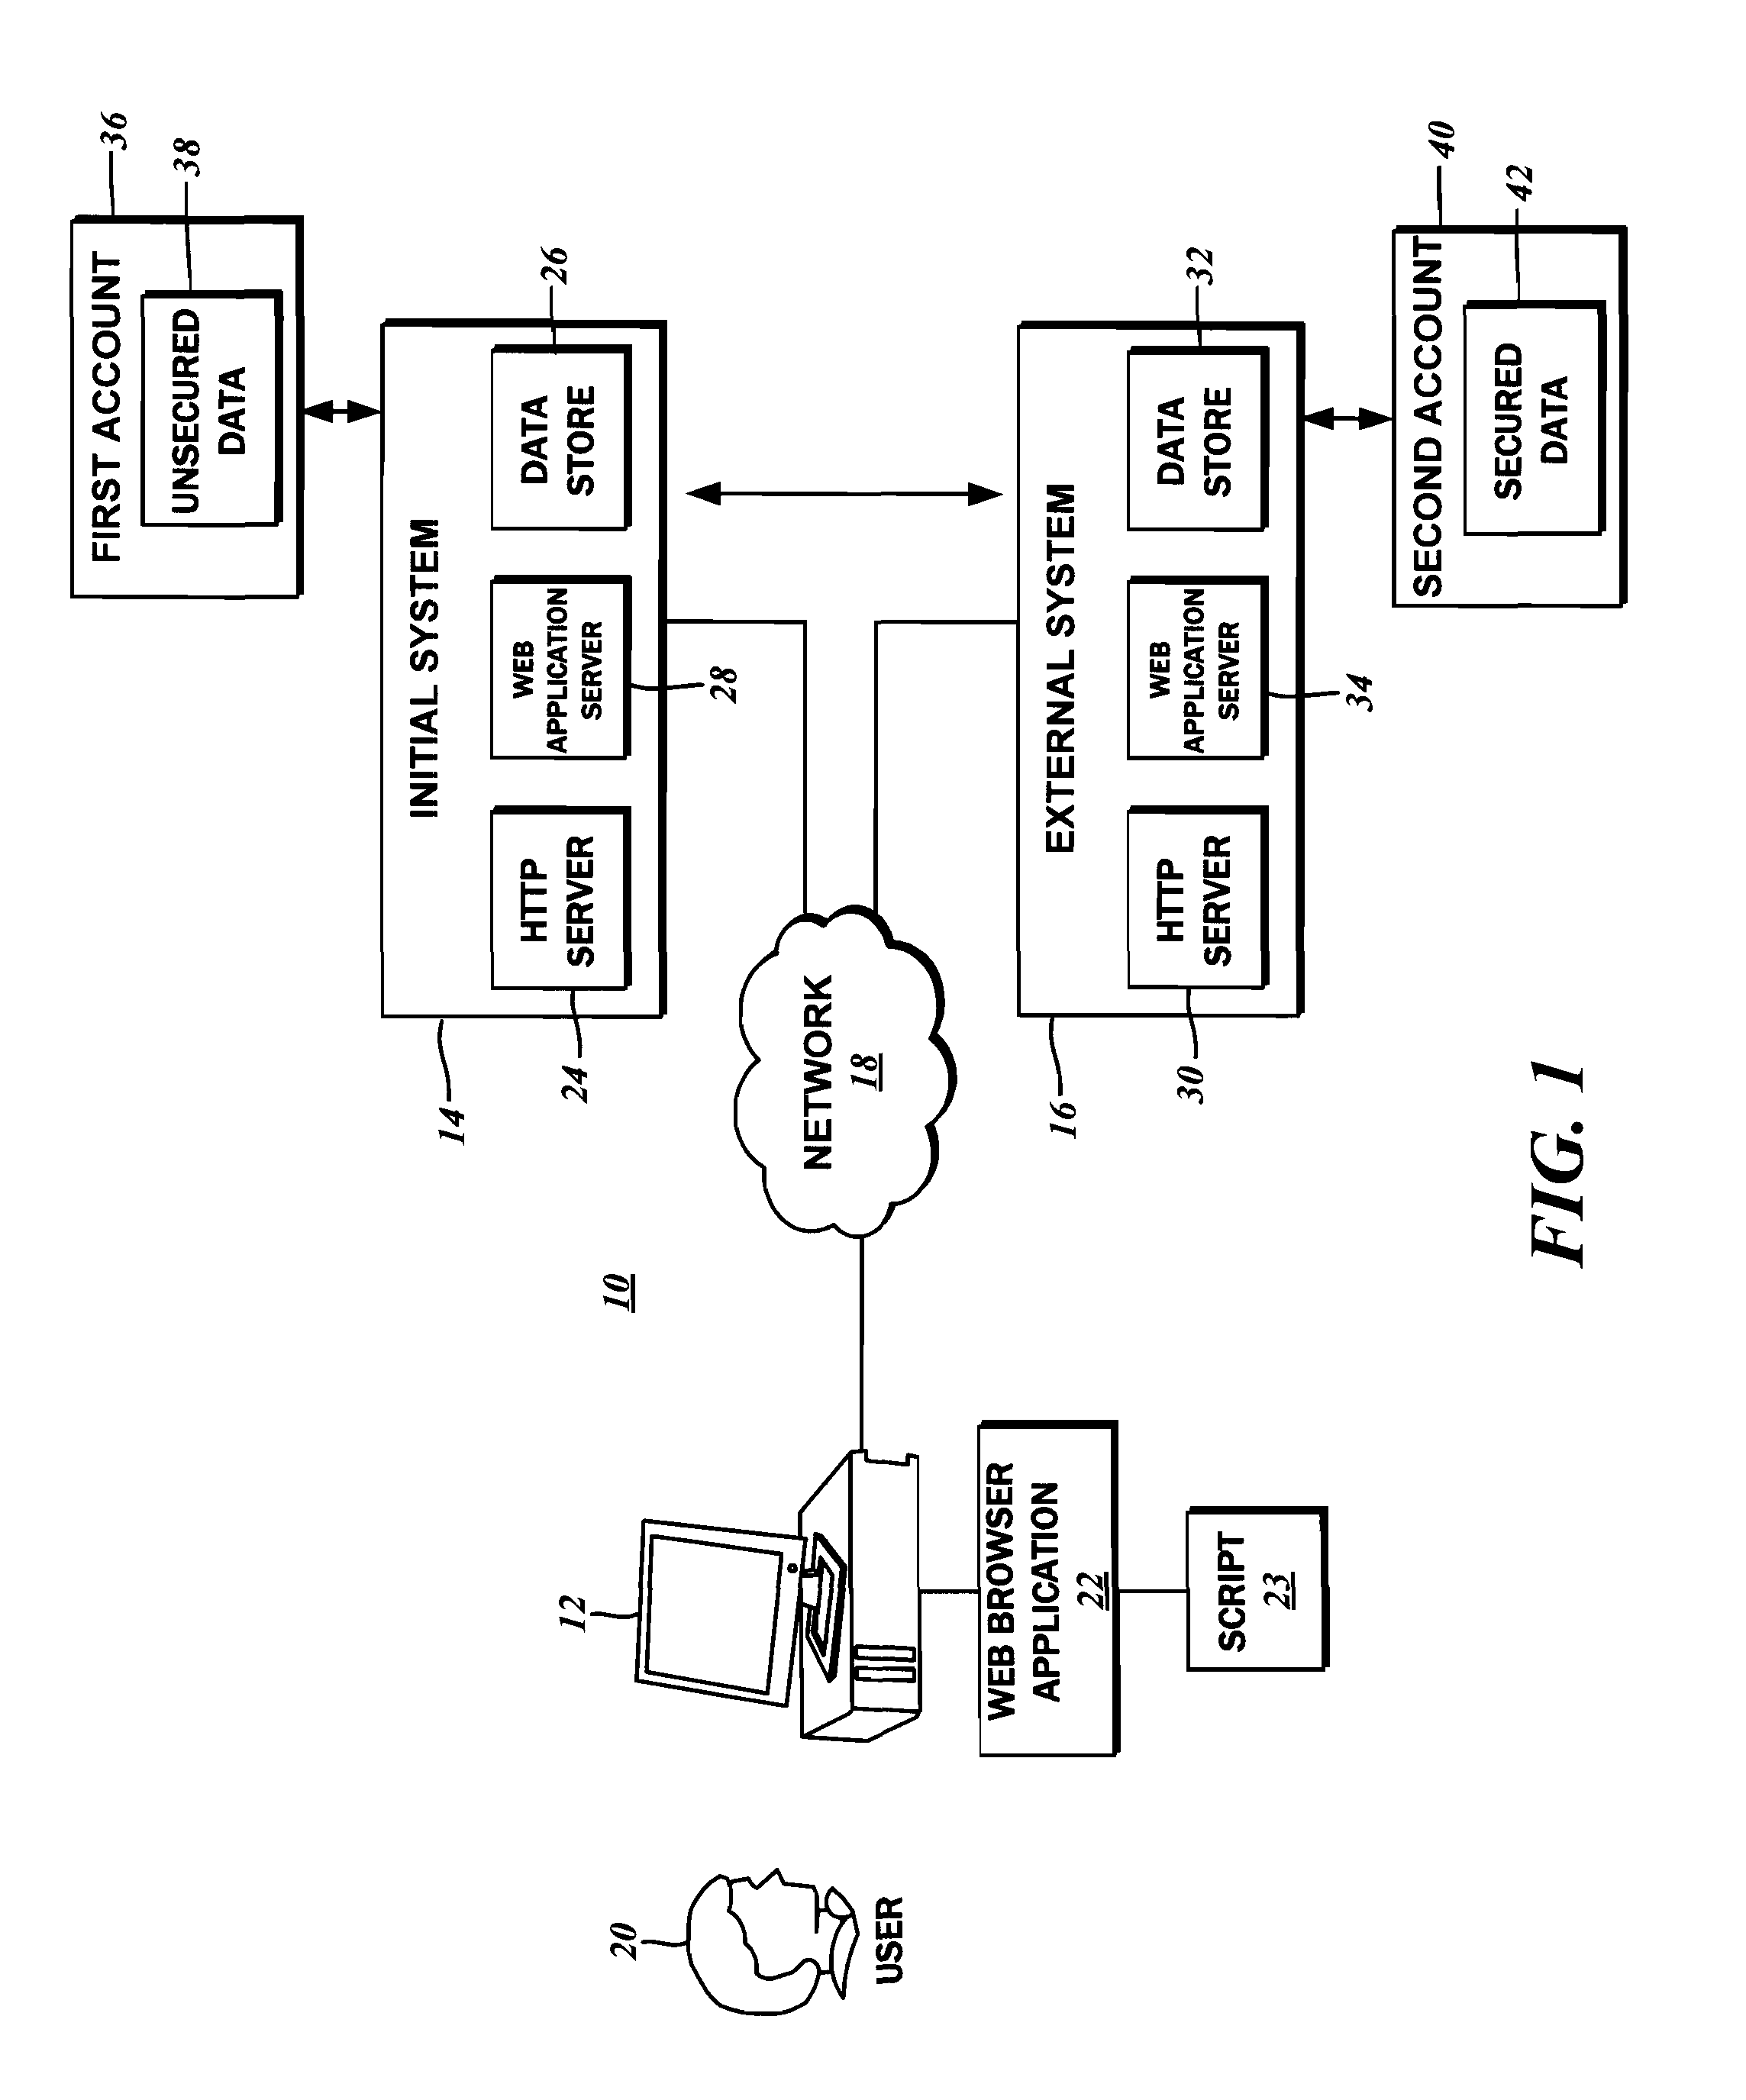 Limiting data exposure in authenticated multi-system transactions